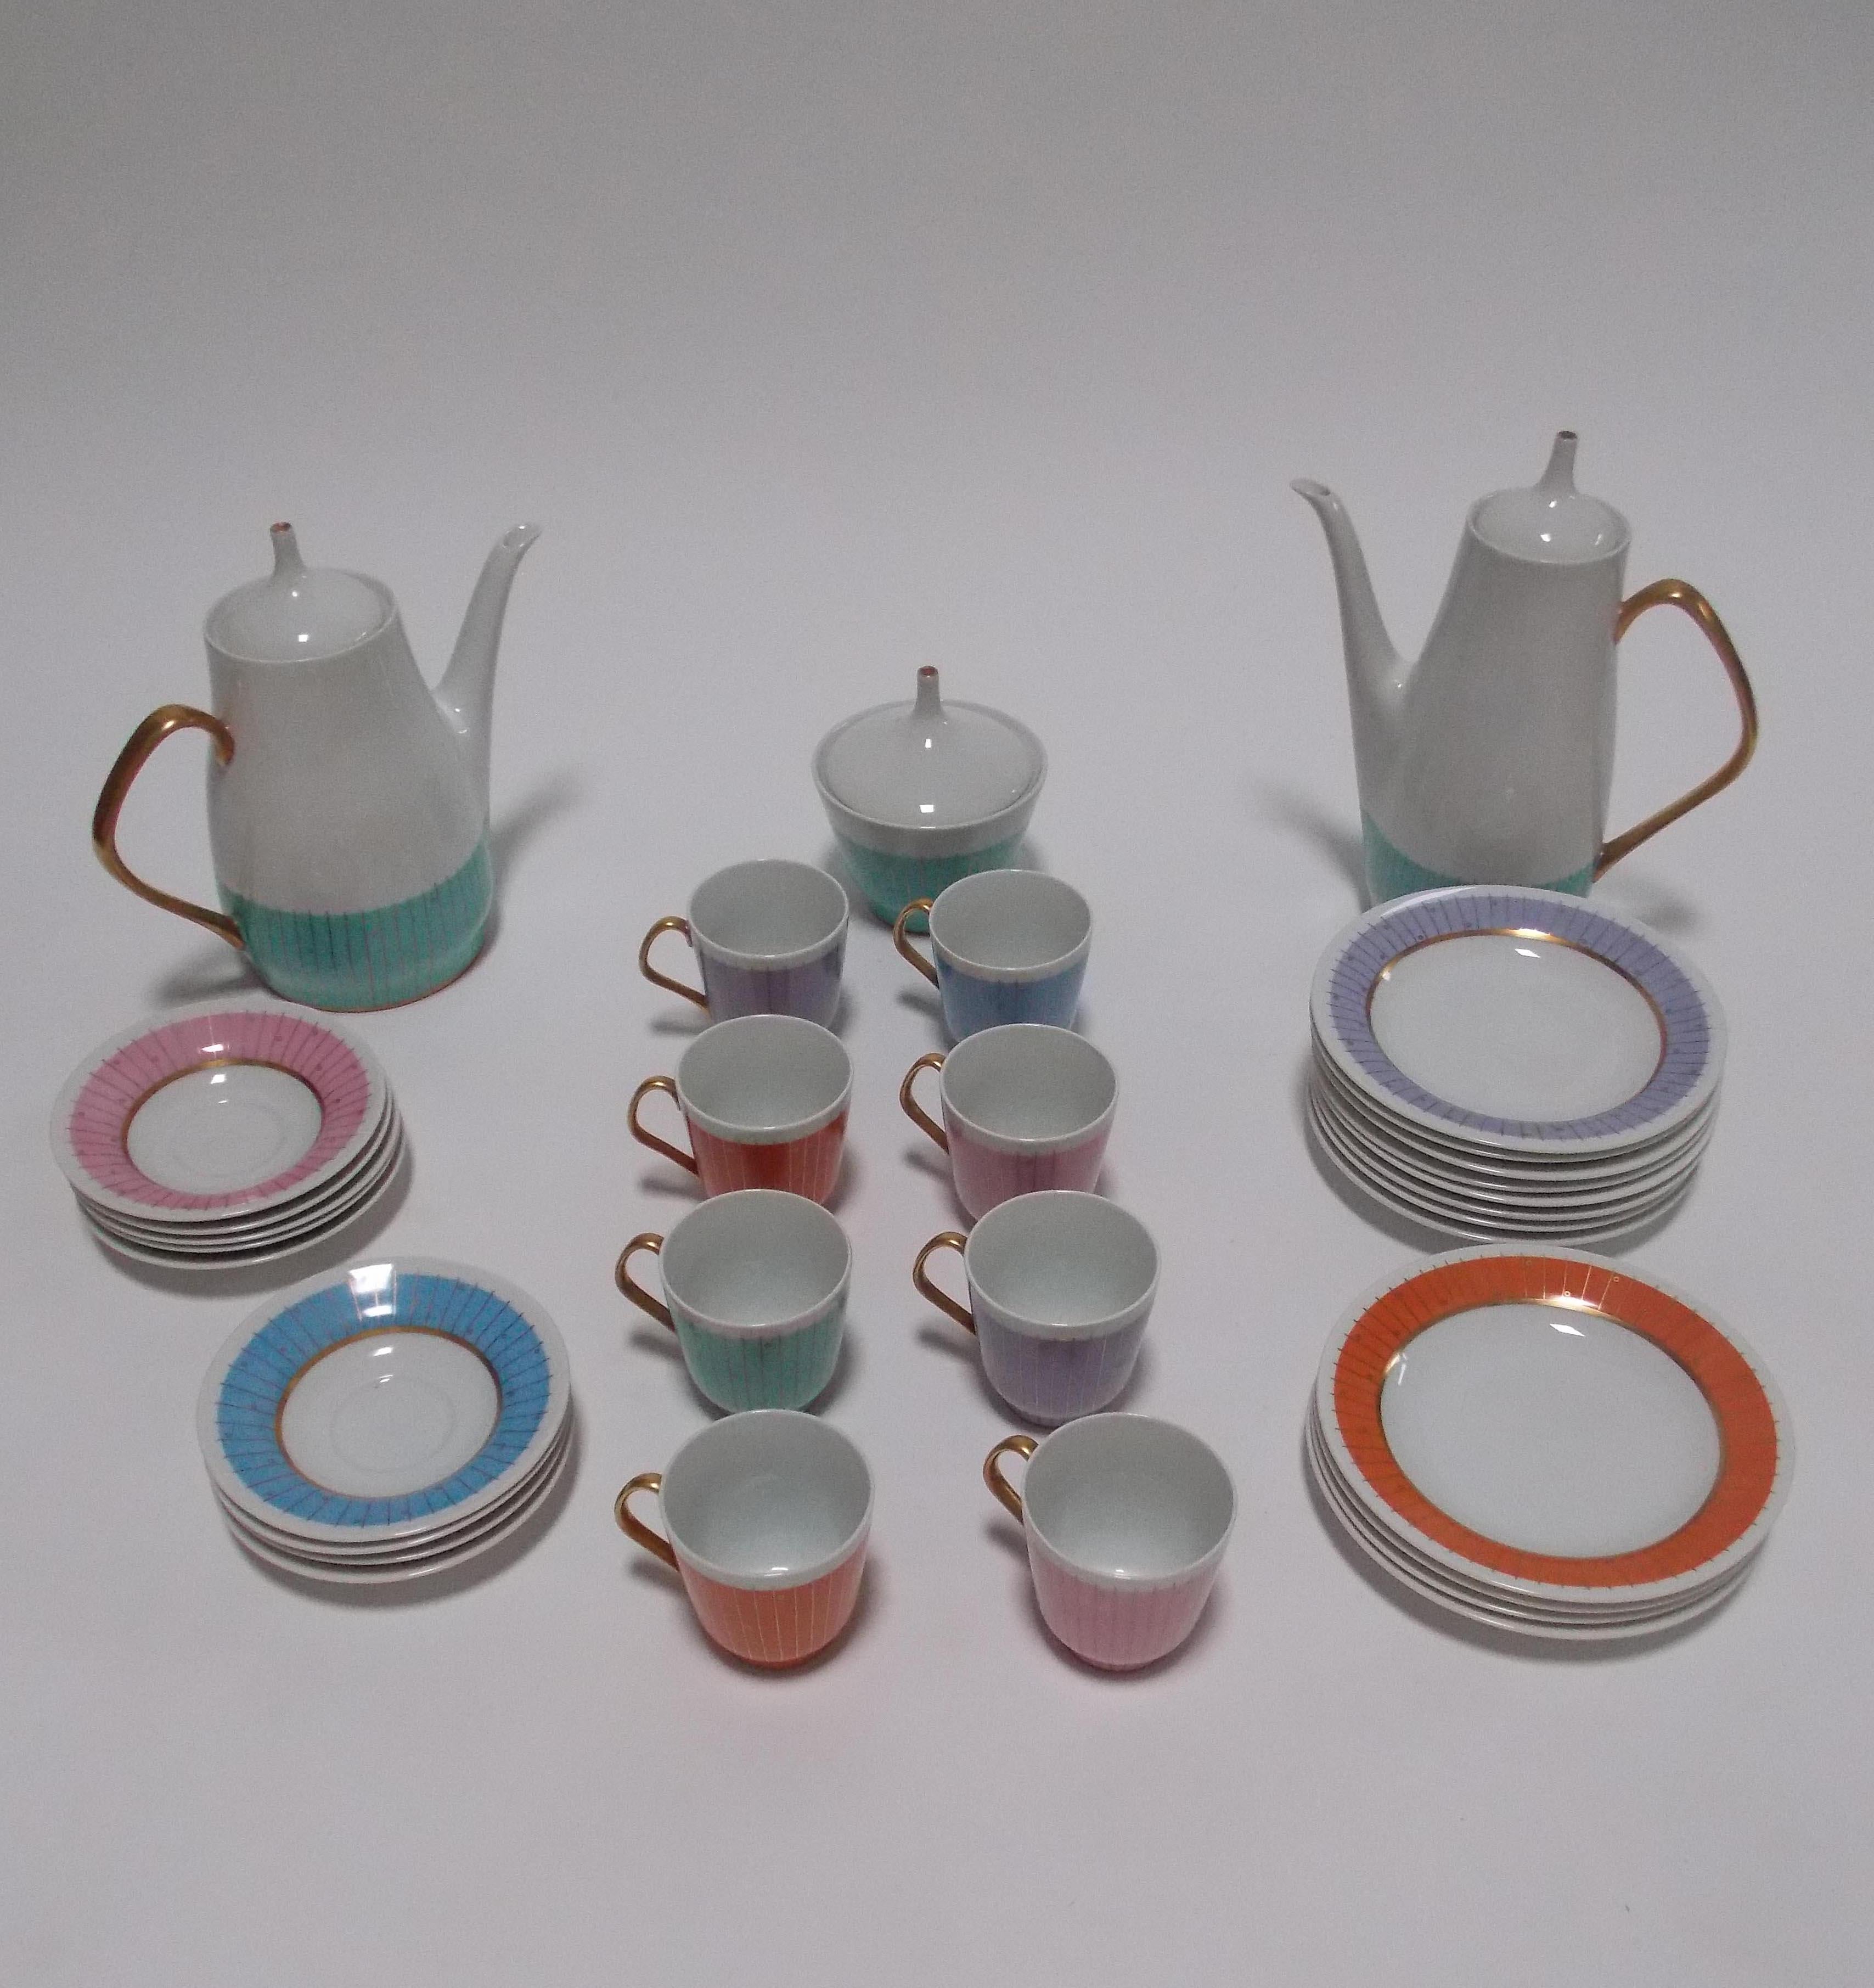 A complete coffee and tea set
consisting of a coffee and tea pot, sugar
Demitasse cups and saucers, cake plates.
Cups- 8 total 3